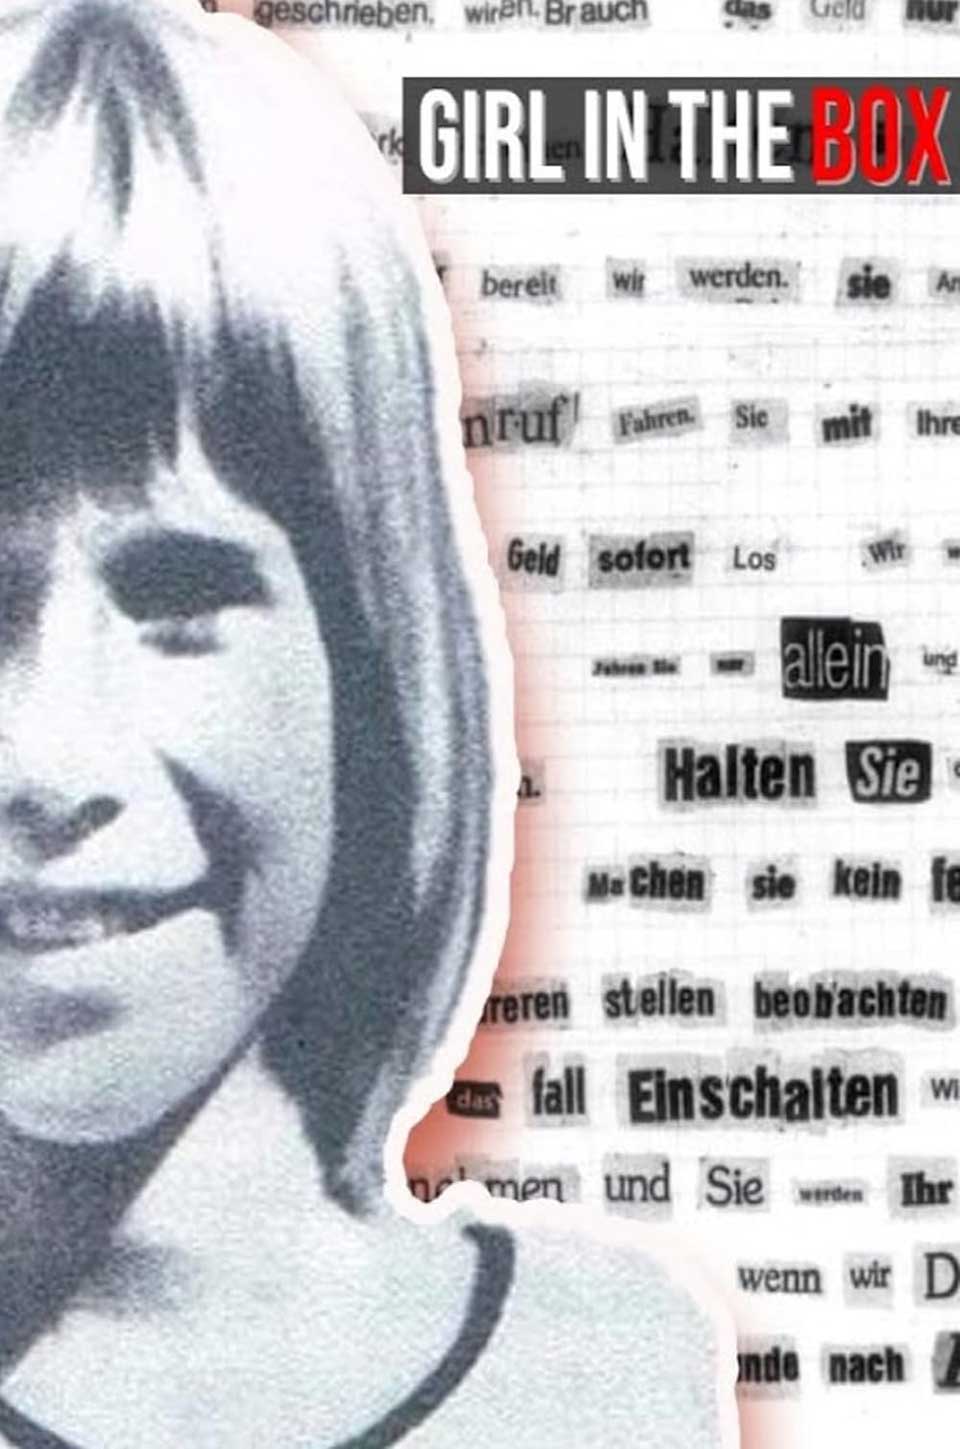 The Child in the Box: What Happened to Ursula Herrmann (2022) TV Documentary | Uni-versal Extras